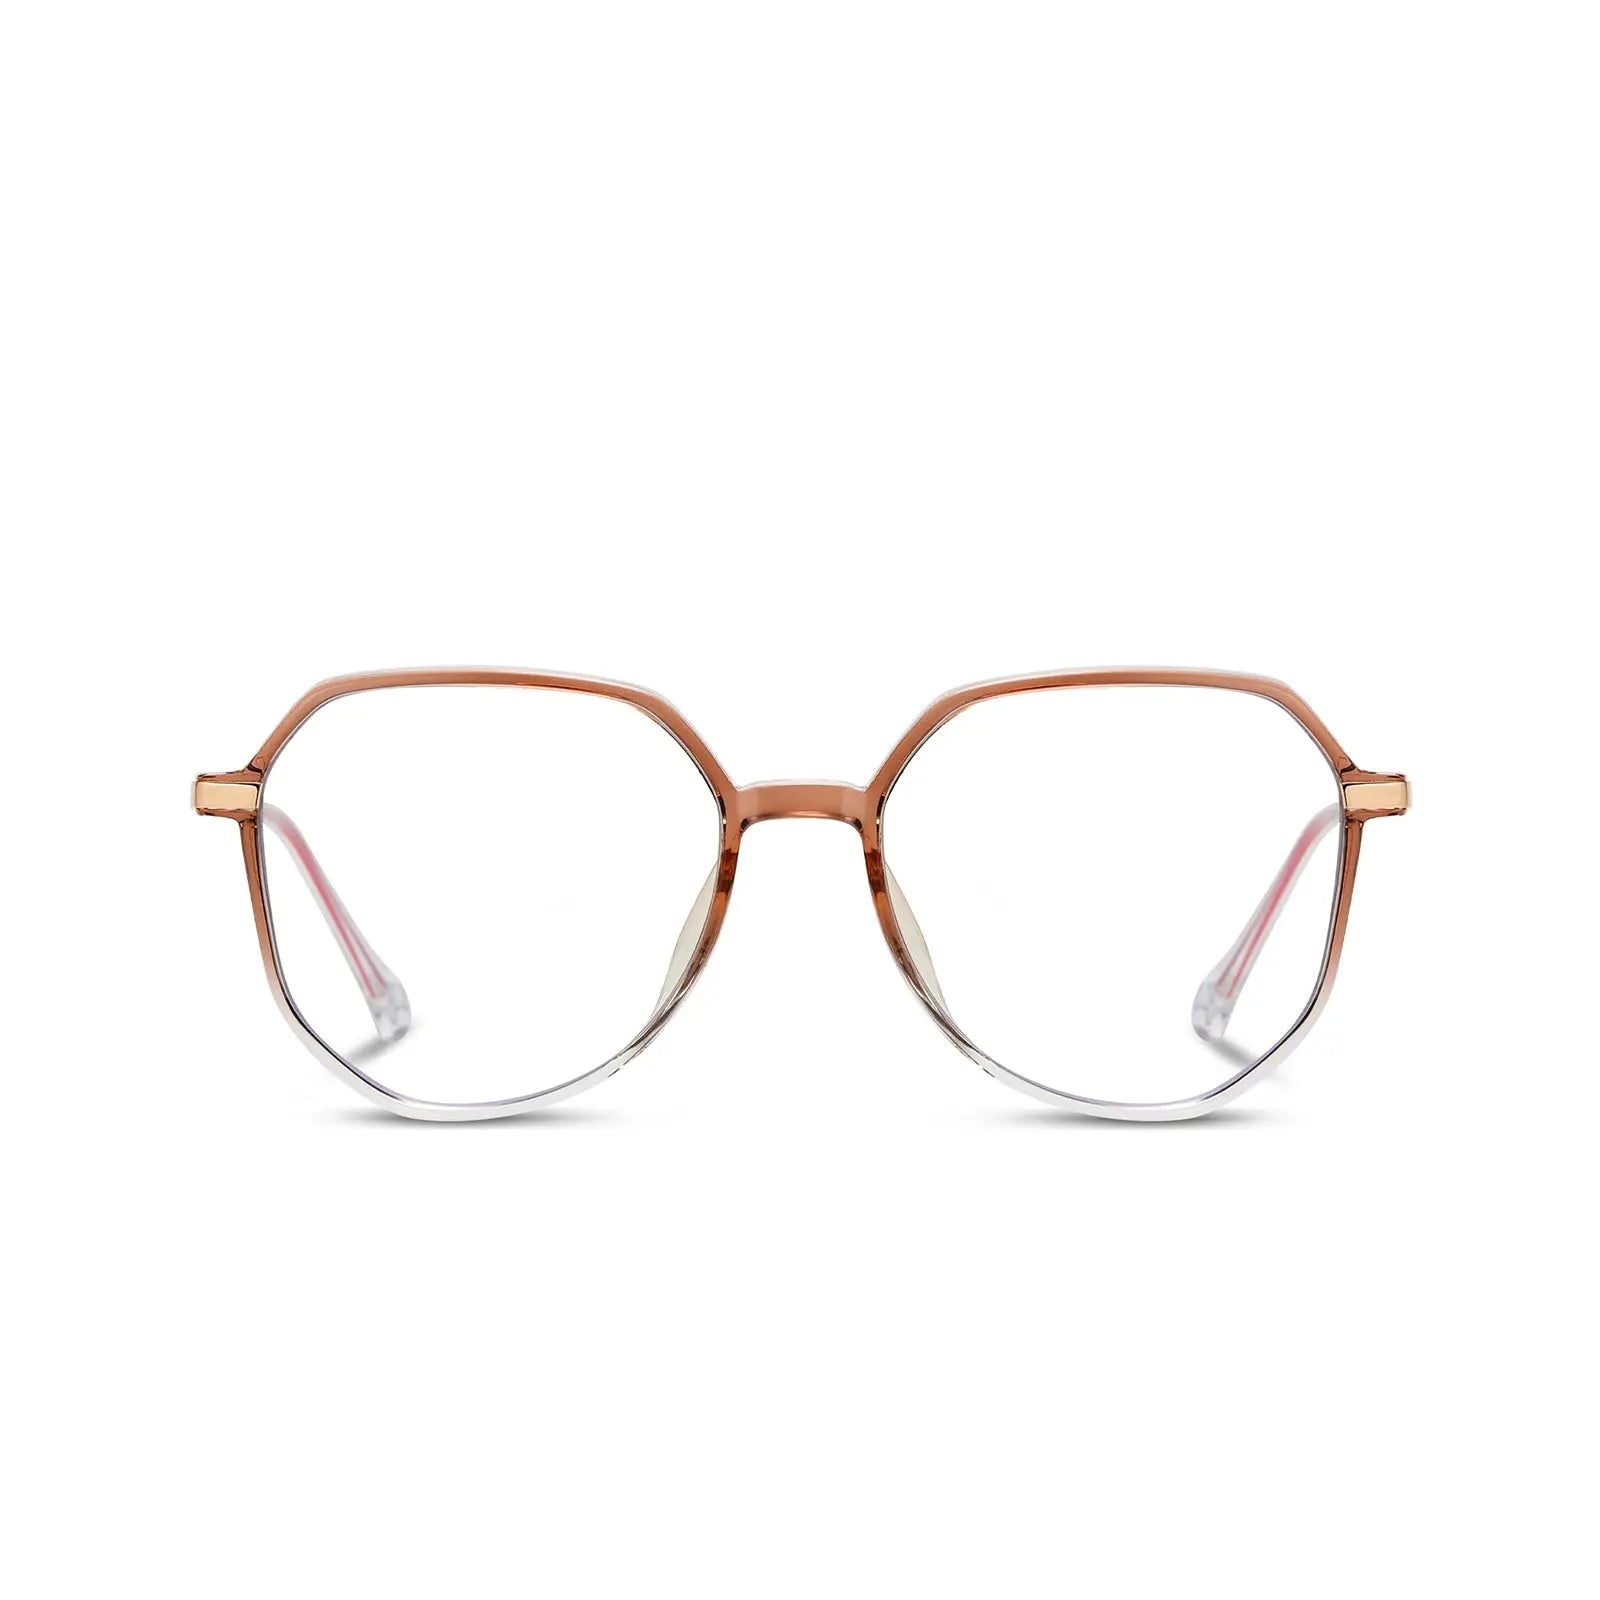 DUCO GLASSES-The right kind of shady Duco Superlight Blue Light Blocking Computer Gaming Glasses for Women 5218 (Brown) New DUCO Blue light